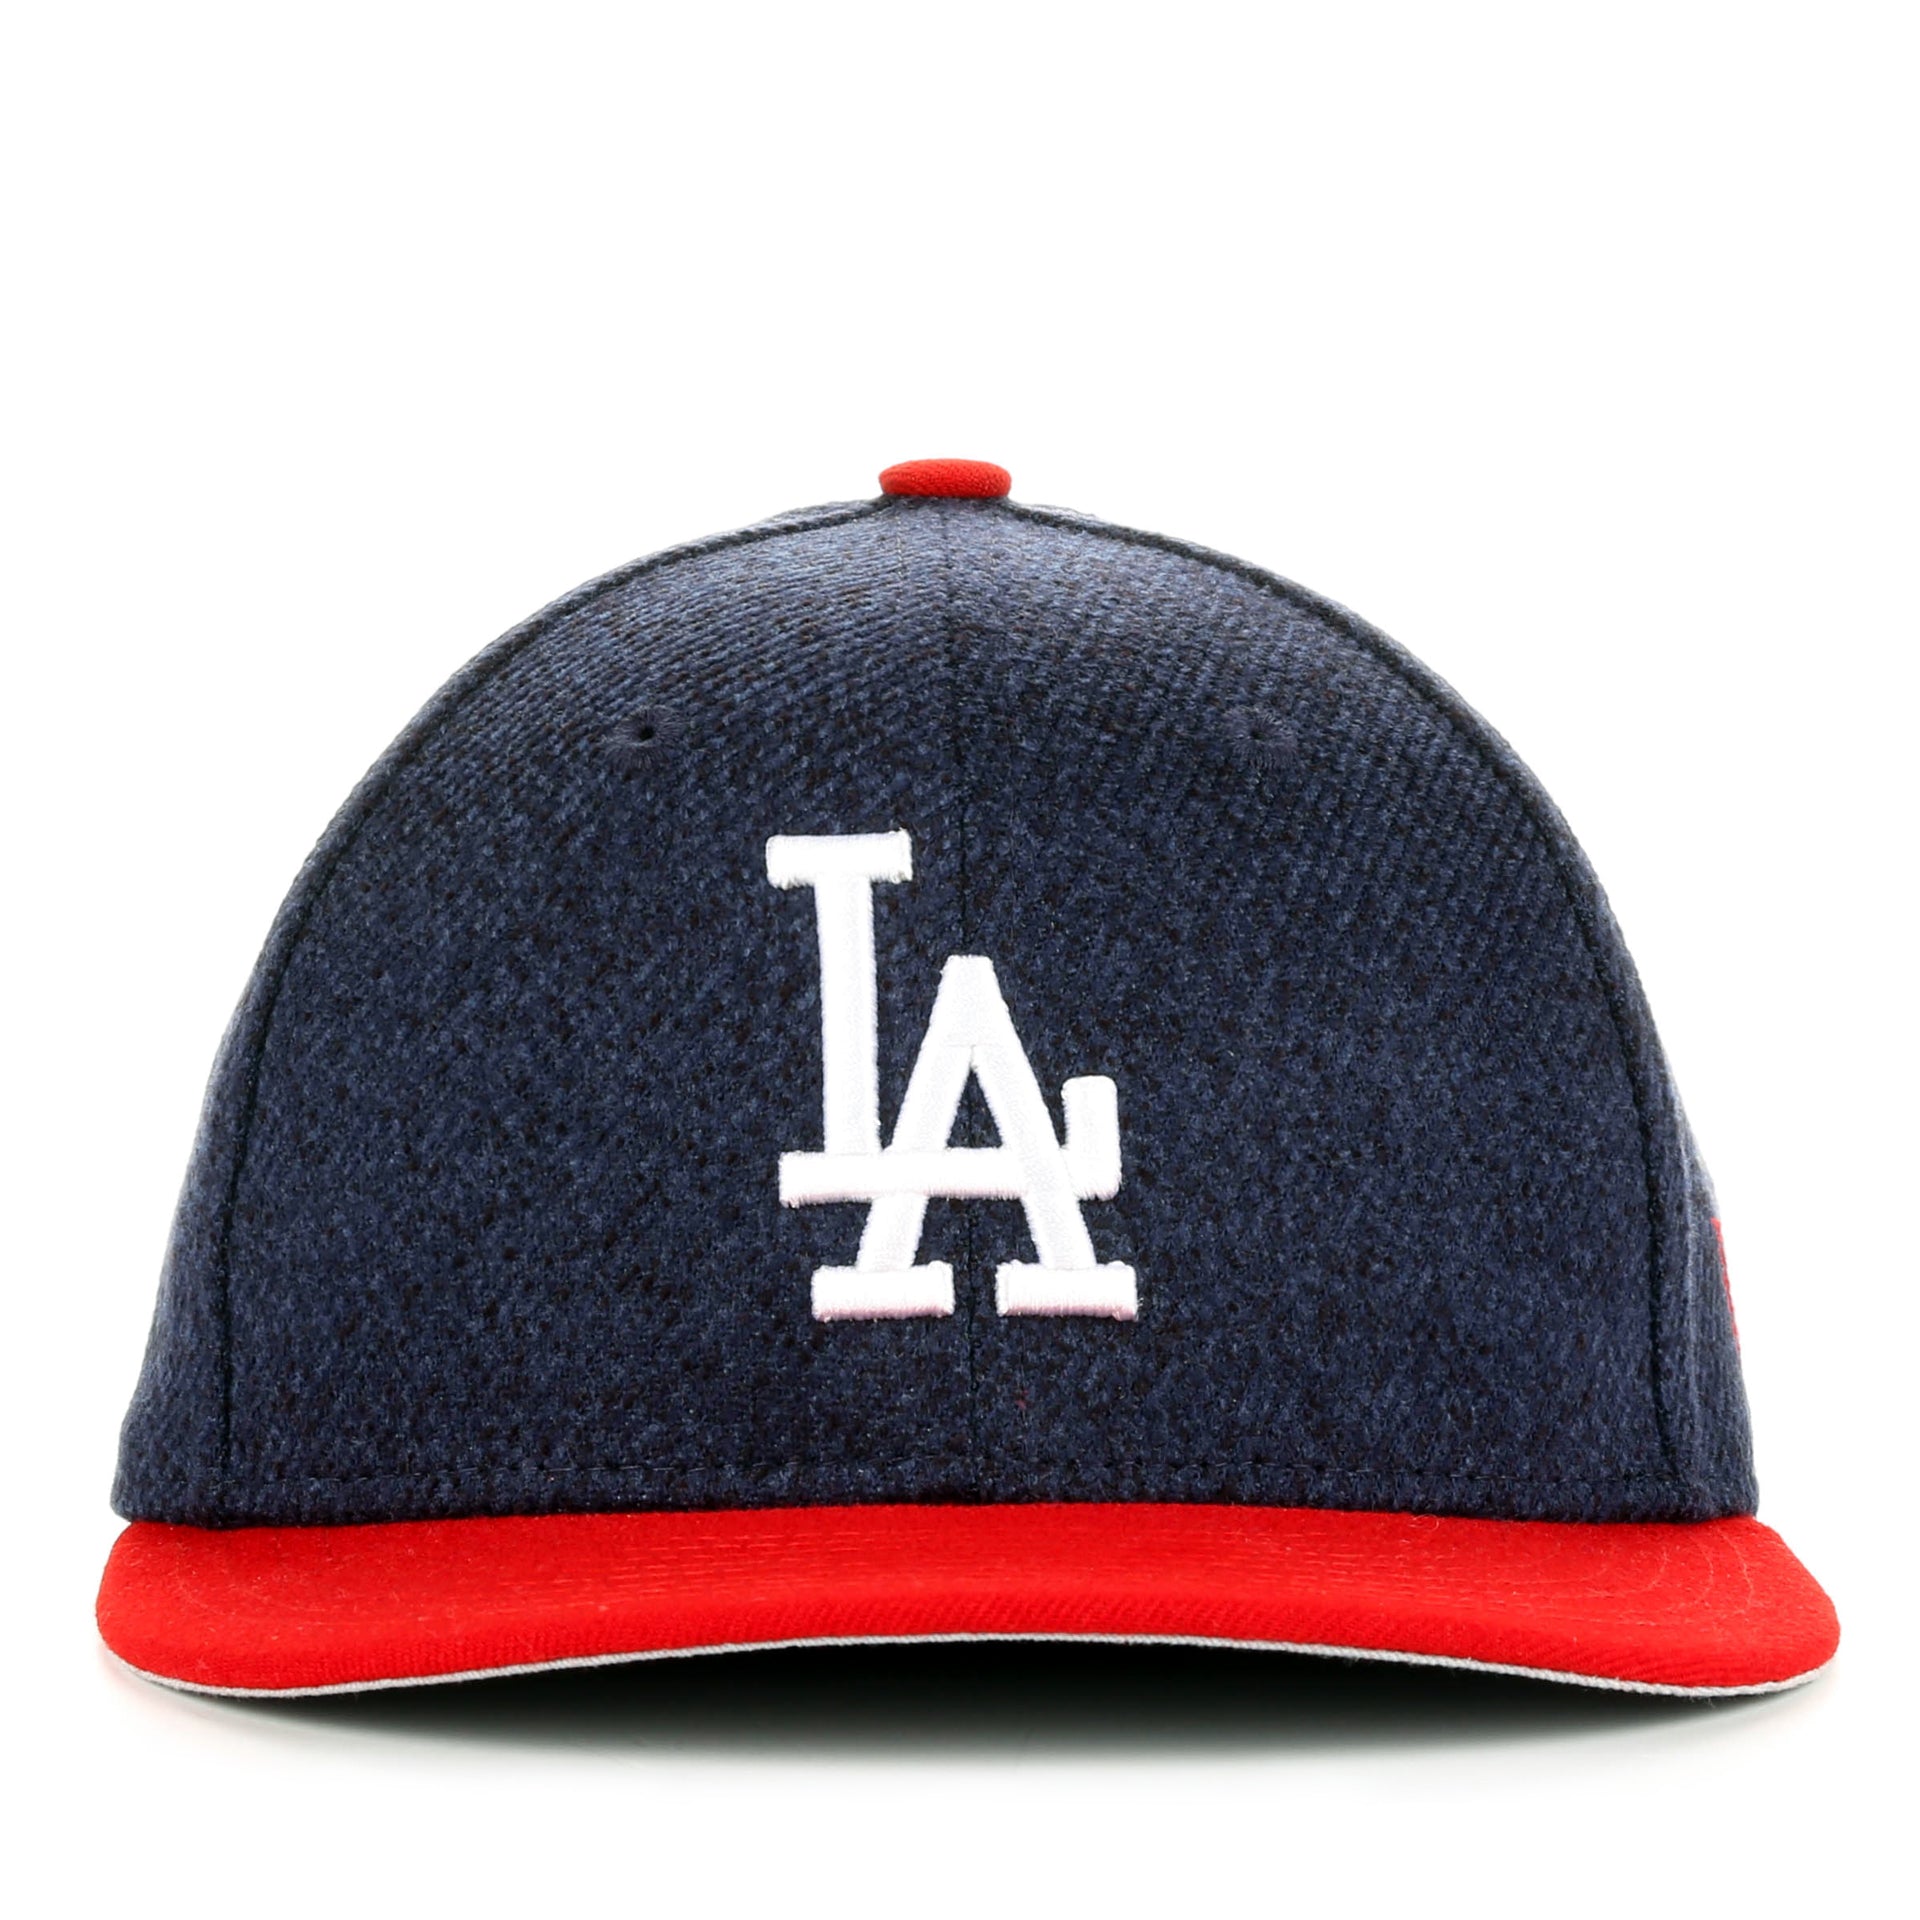 Indeholde Tag ud kollidere New Era 9Fifty Classic Trim Snapback - Los Angeles Dodgers/Navy - New Star